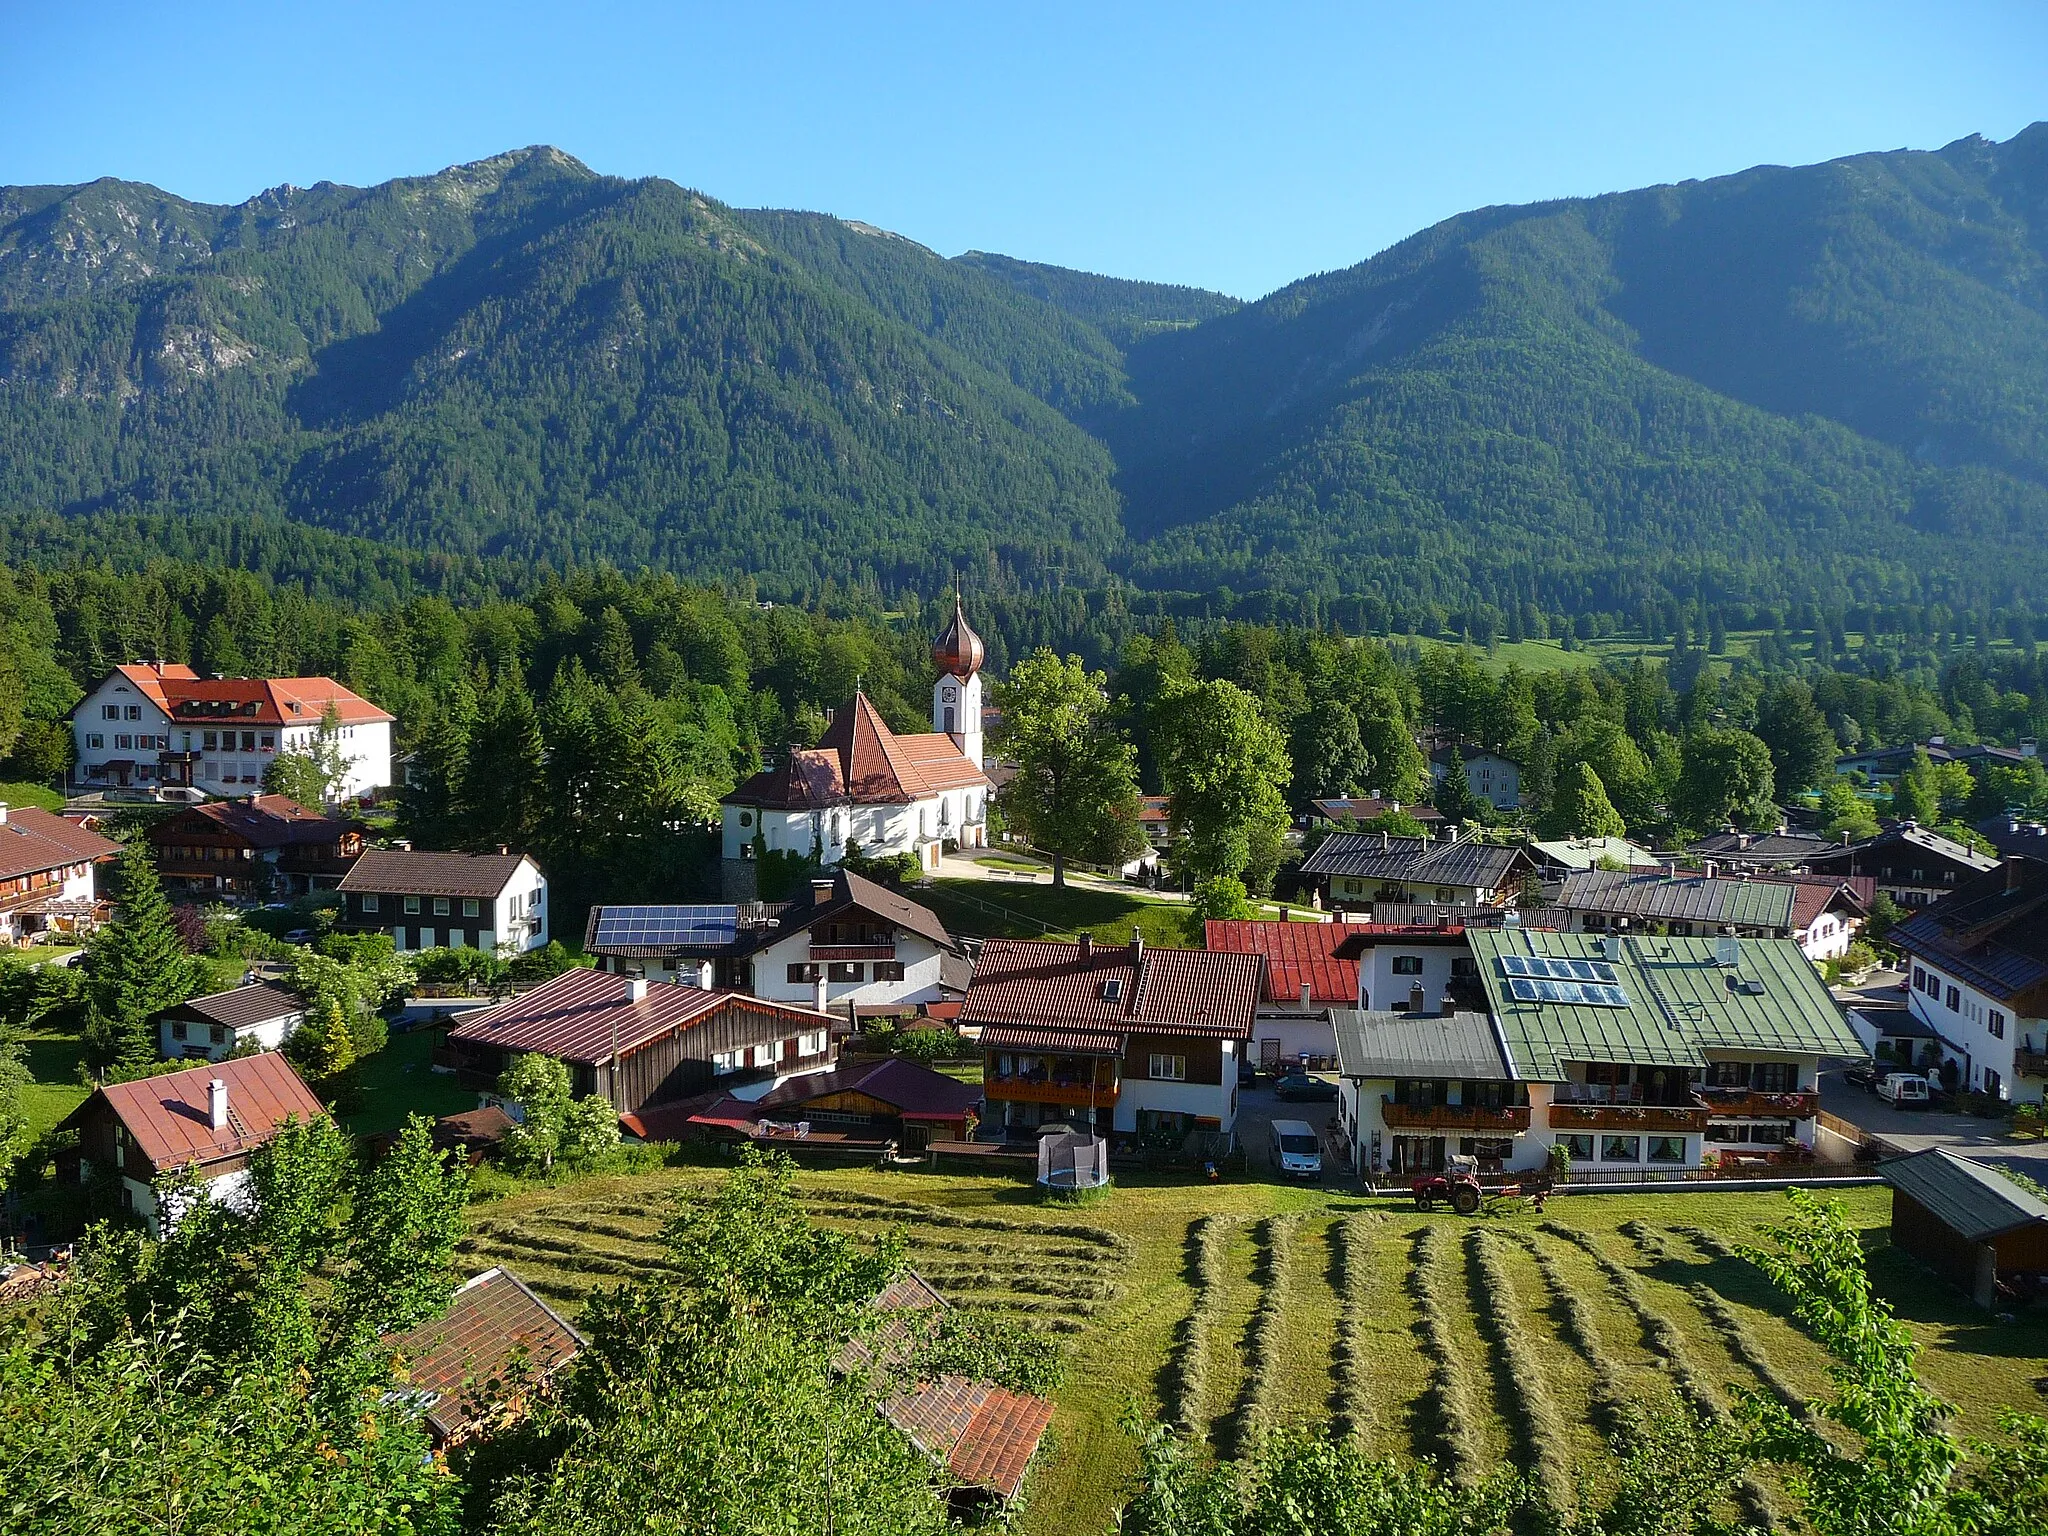 Photo showing: The Bavarian village Grainau with the mountainrange of the Ammergauer Alpen in the background